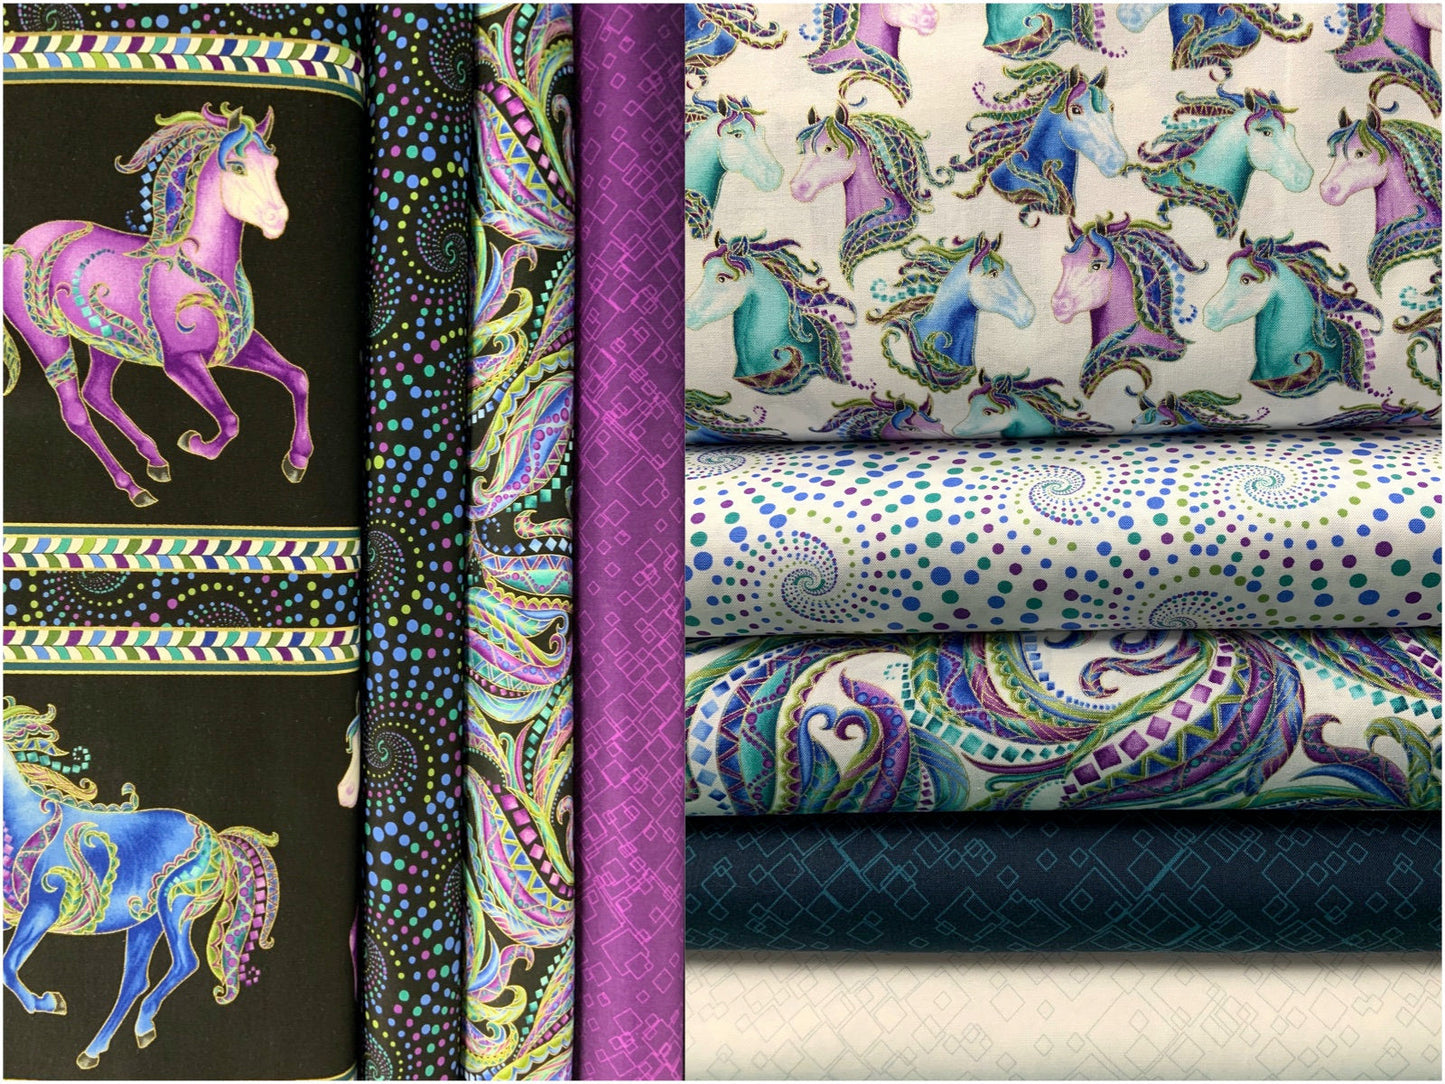 Horsen Around by Ann Lauer Small Reigning Horses White with Metallic 6858MB-09 Cotton Woven Fabric